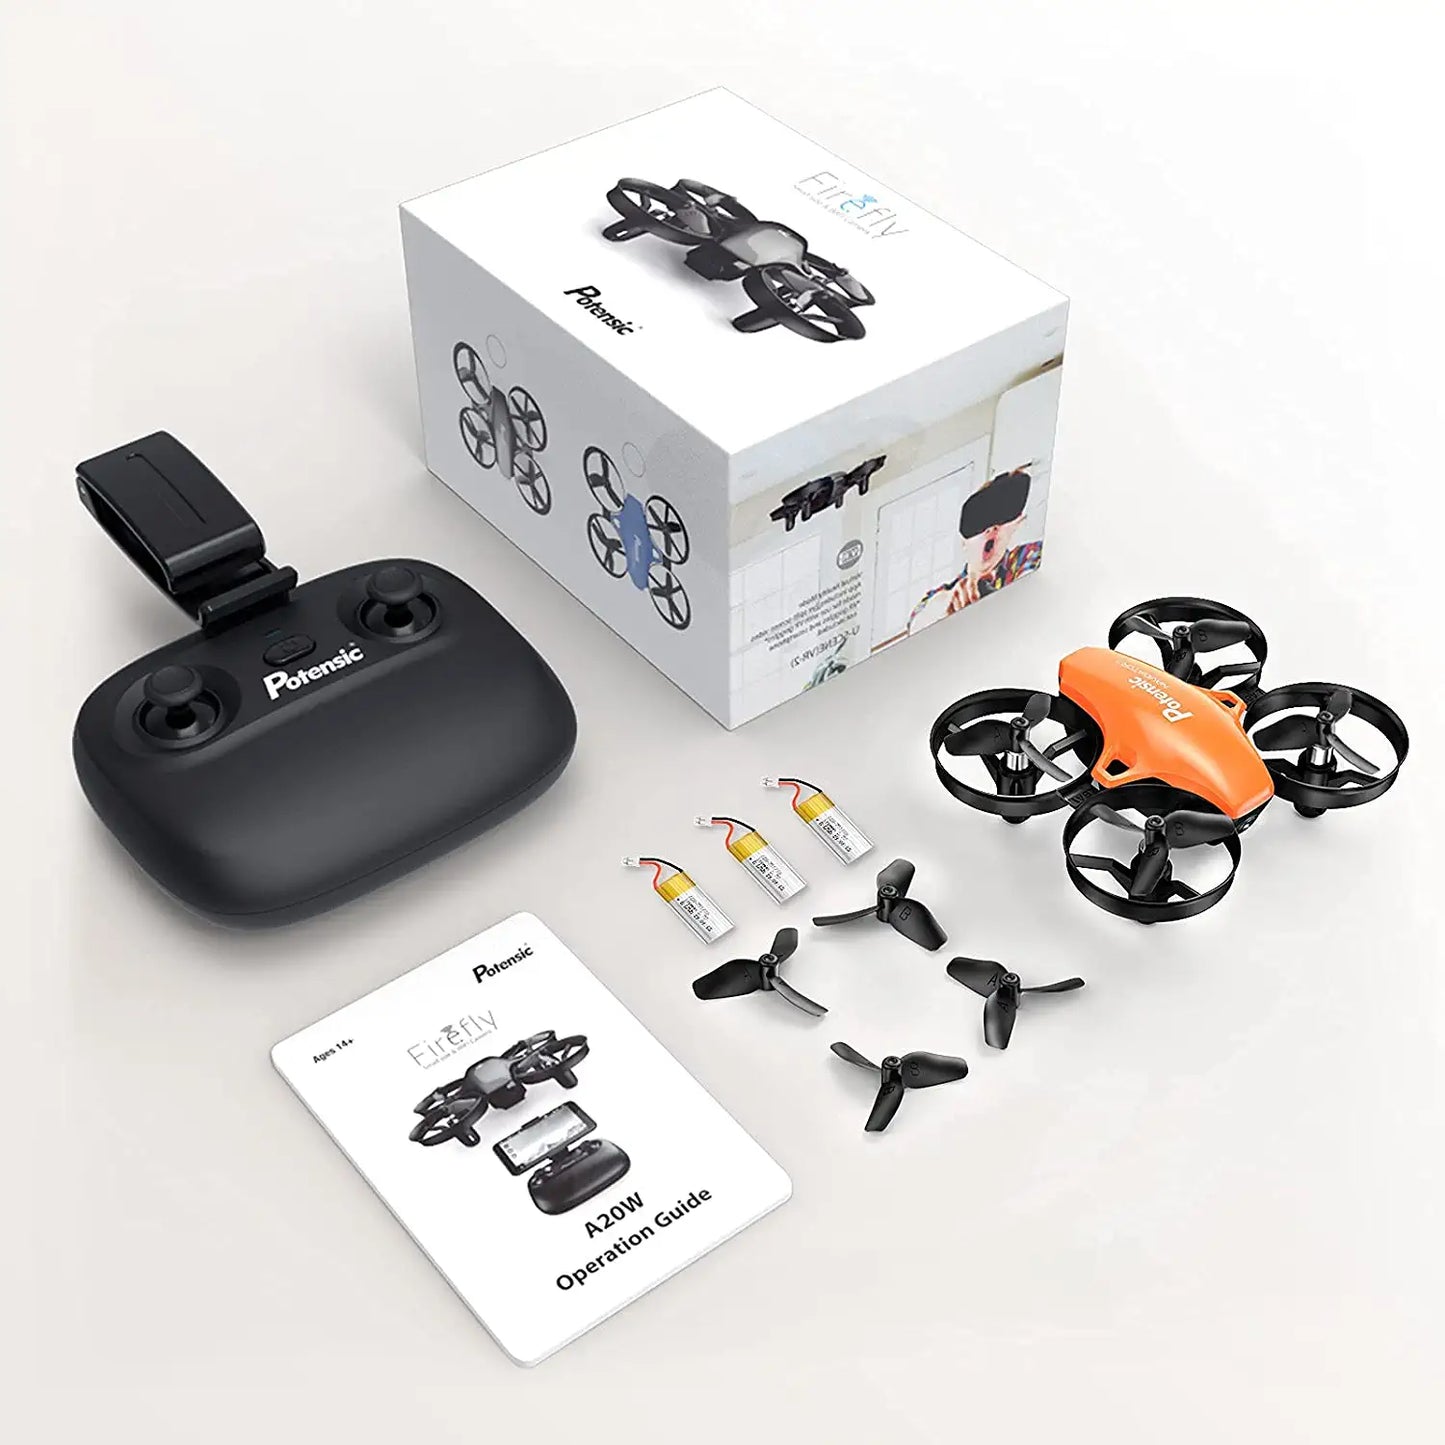 Potensic A20W Drone - for Kids, Mini Drone with Camera 720P HD, RC Drone, 3 Batteries with Altitude Hold, One Key Take Off, Easy for Beginners, Gravity Sensor, Headless Mode - RCDrone